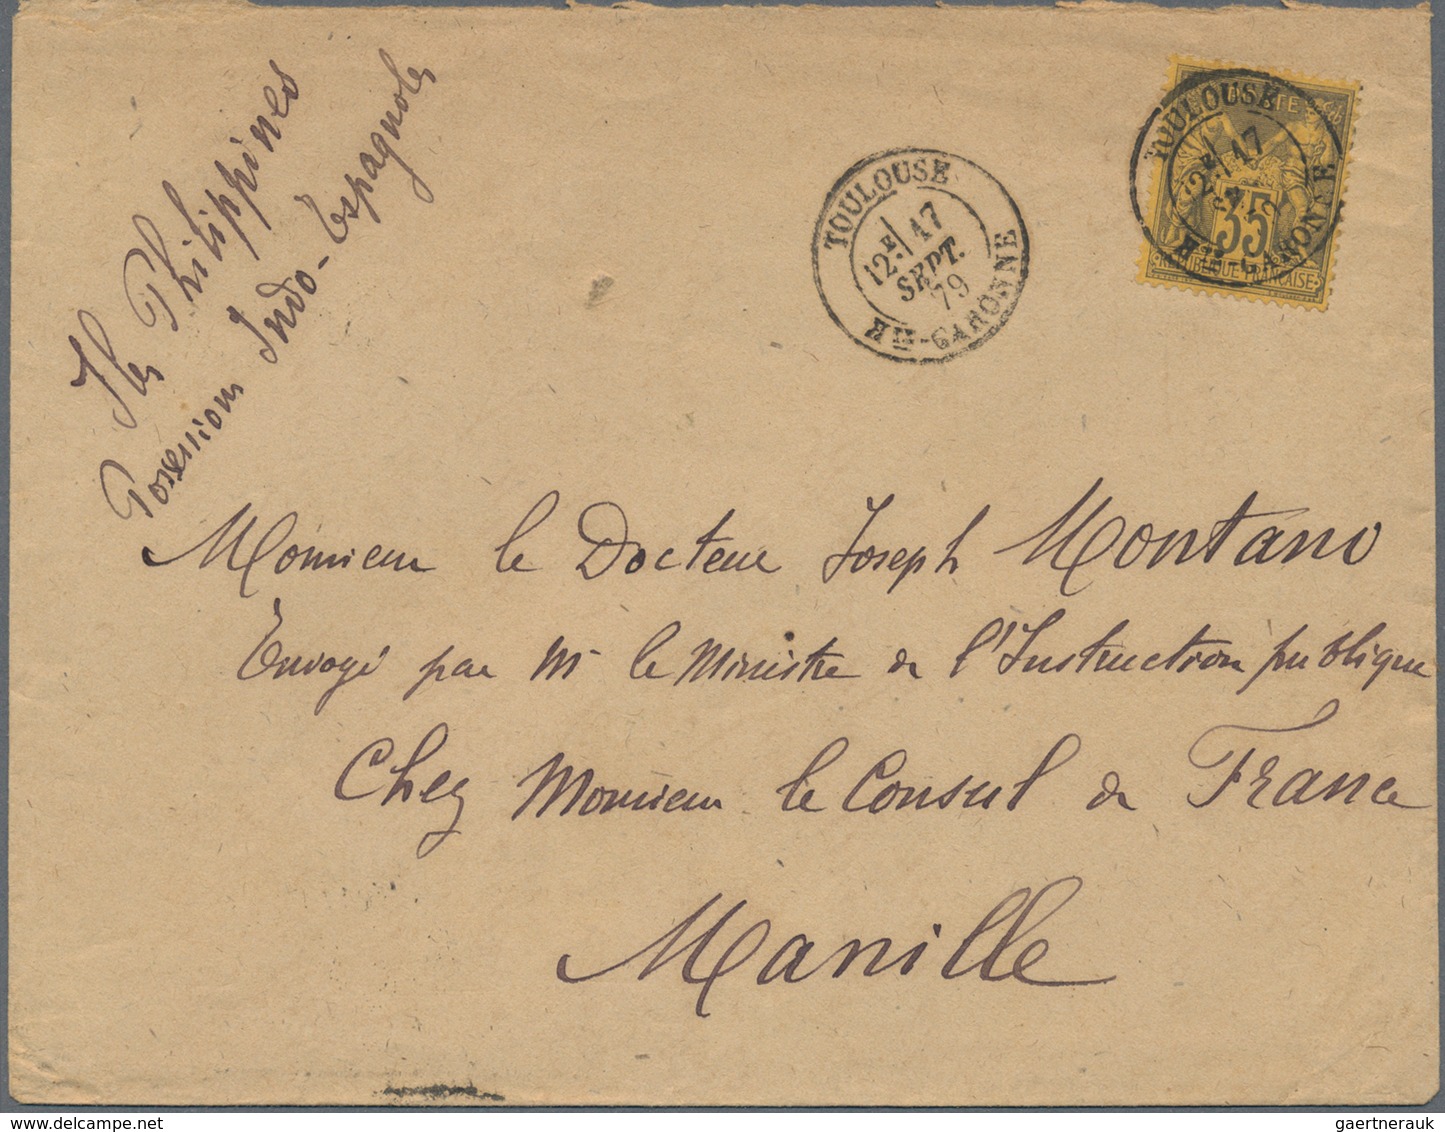 09617 Philippinen: 1879. Envelope Addressed To The French Scientific Mission In Manila, Philippines Bearin - Philippines